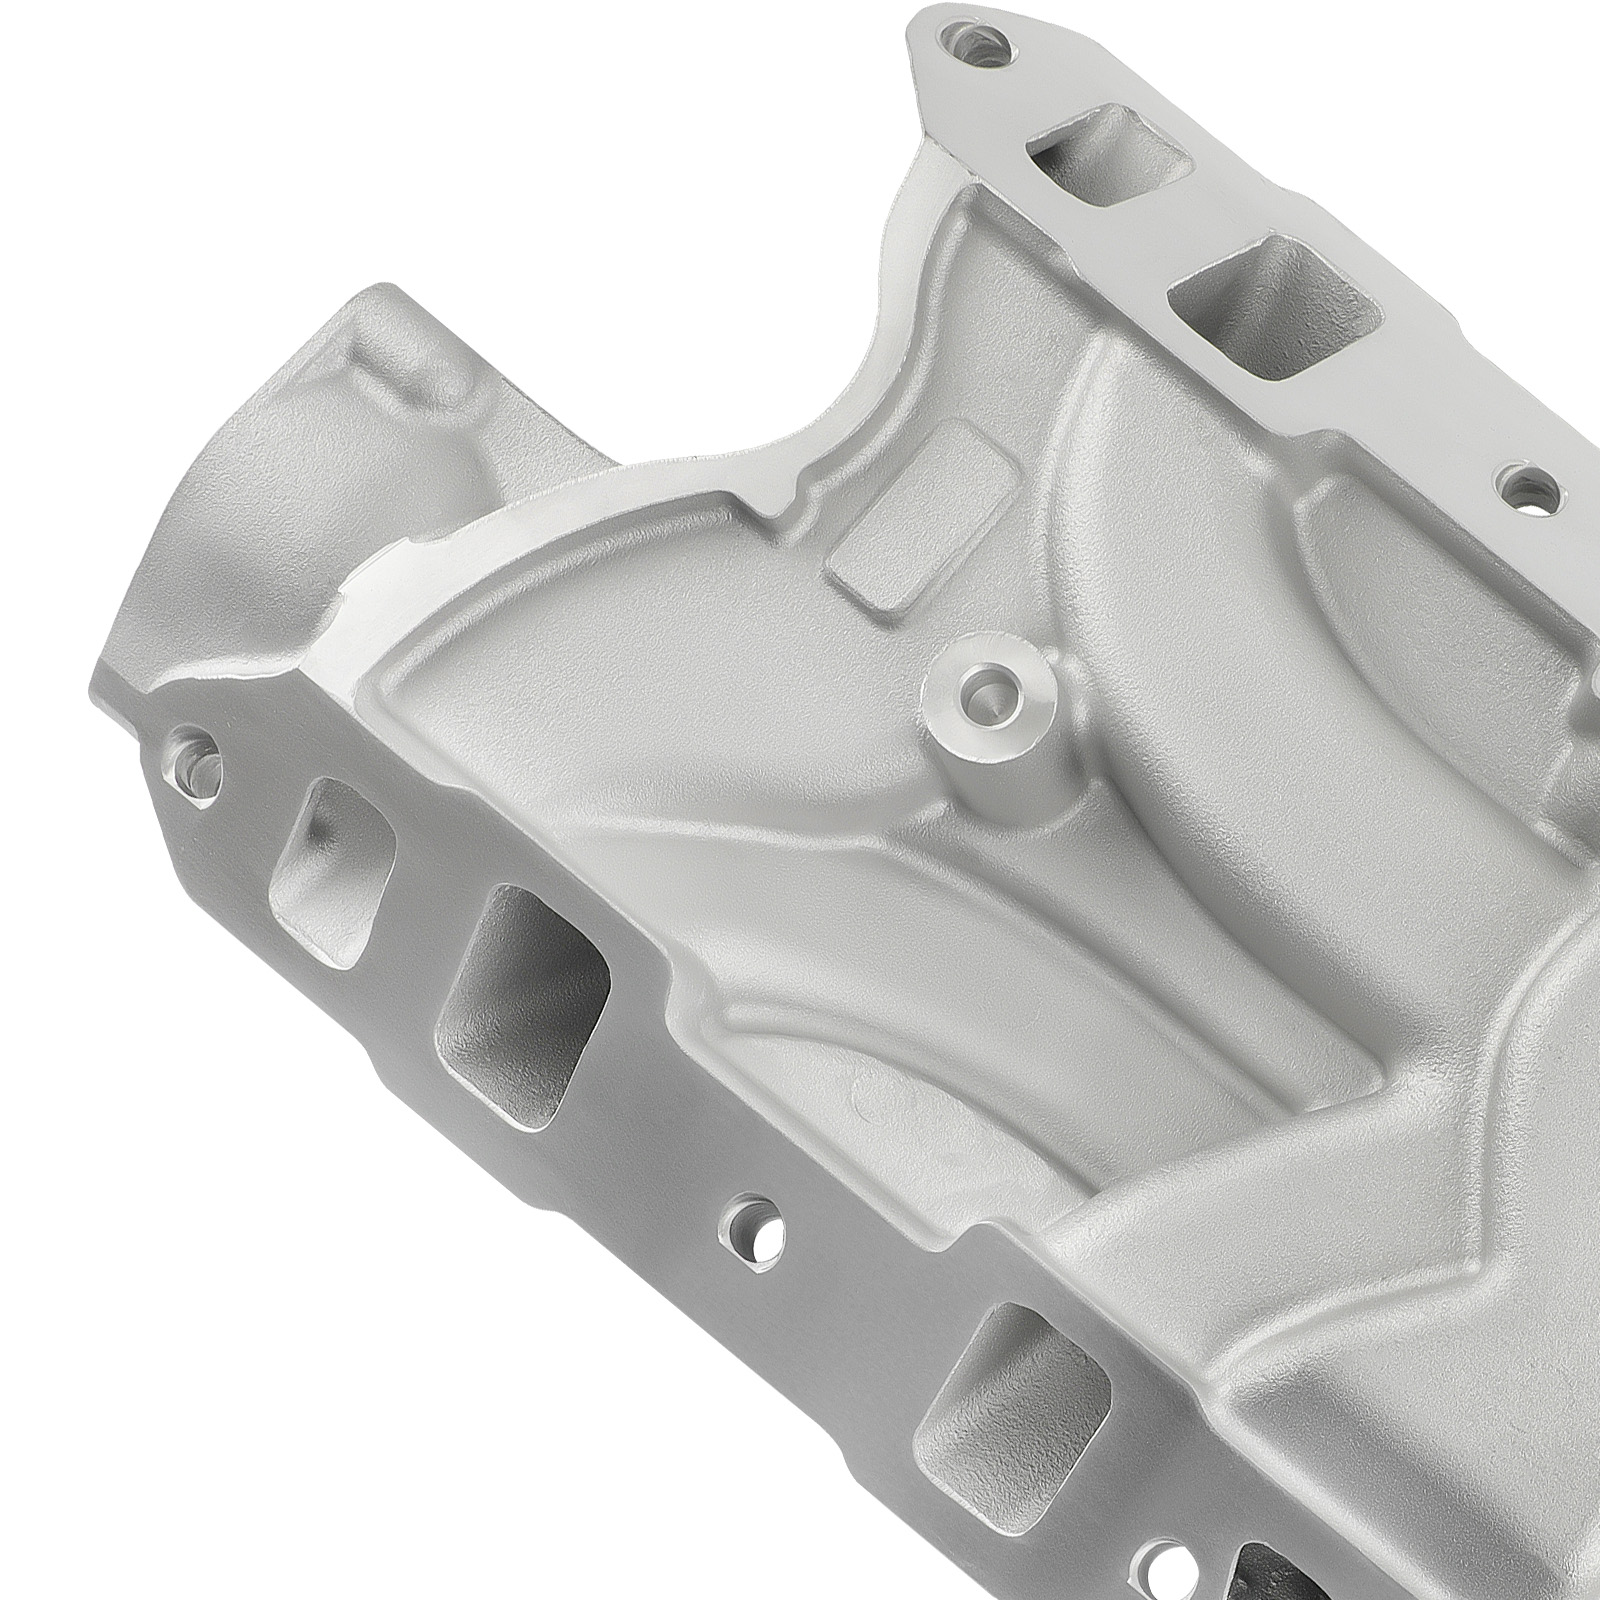 Dual Plane Aluminum Intake Manifold fit for Small Block Ford SBF V8 260 289 302